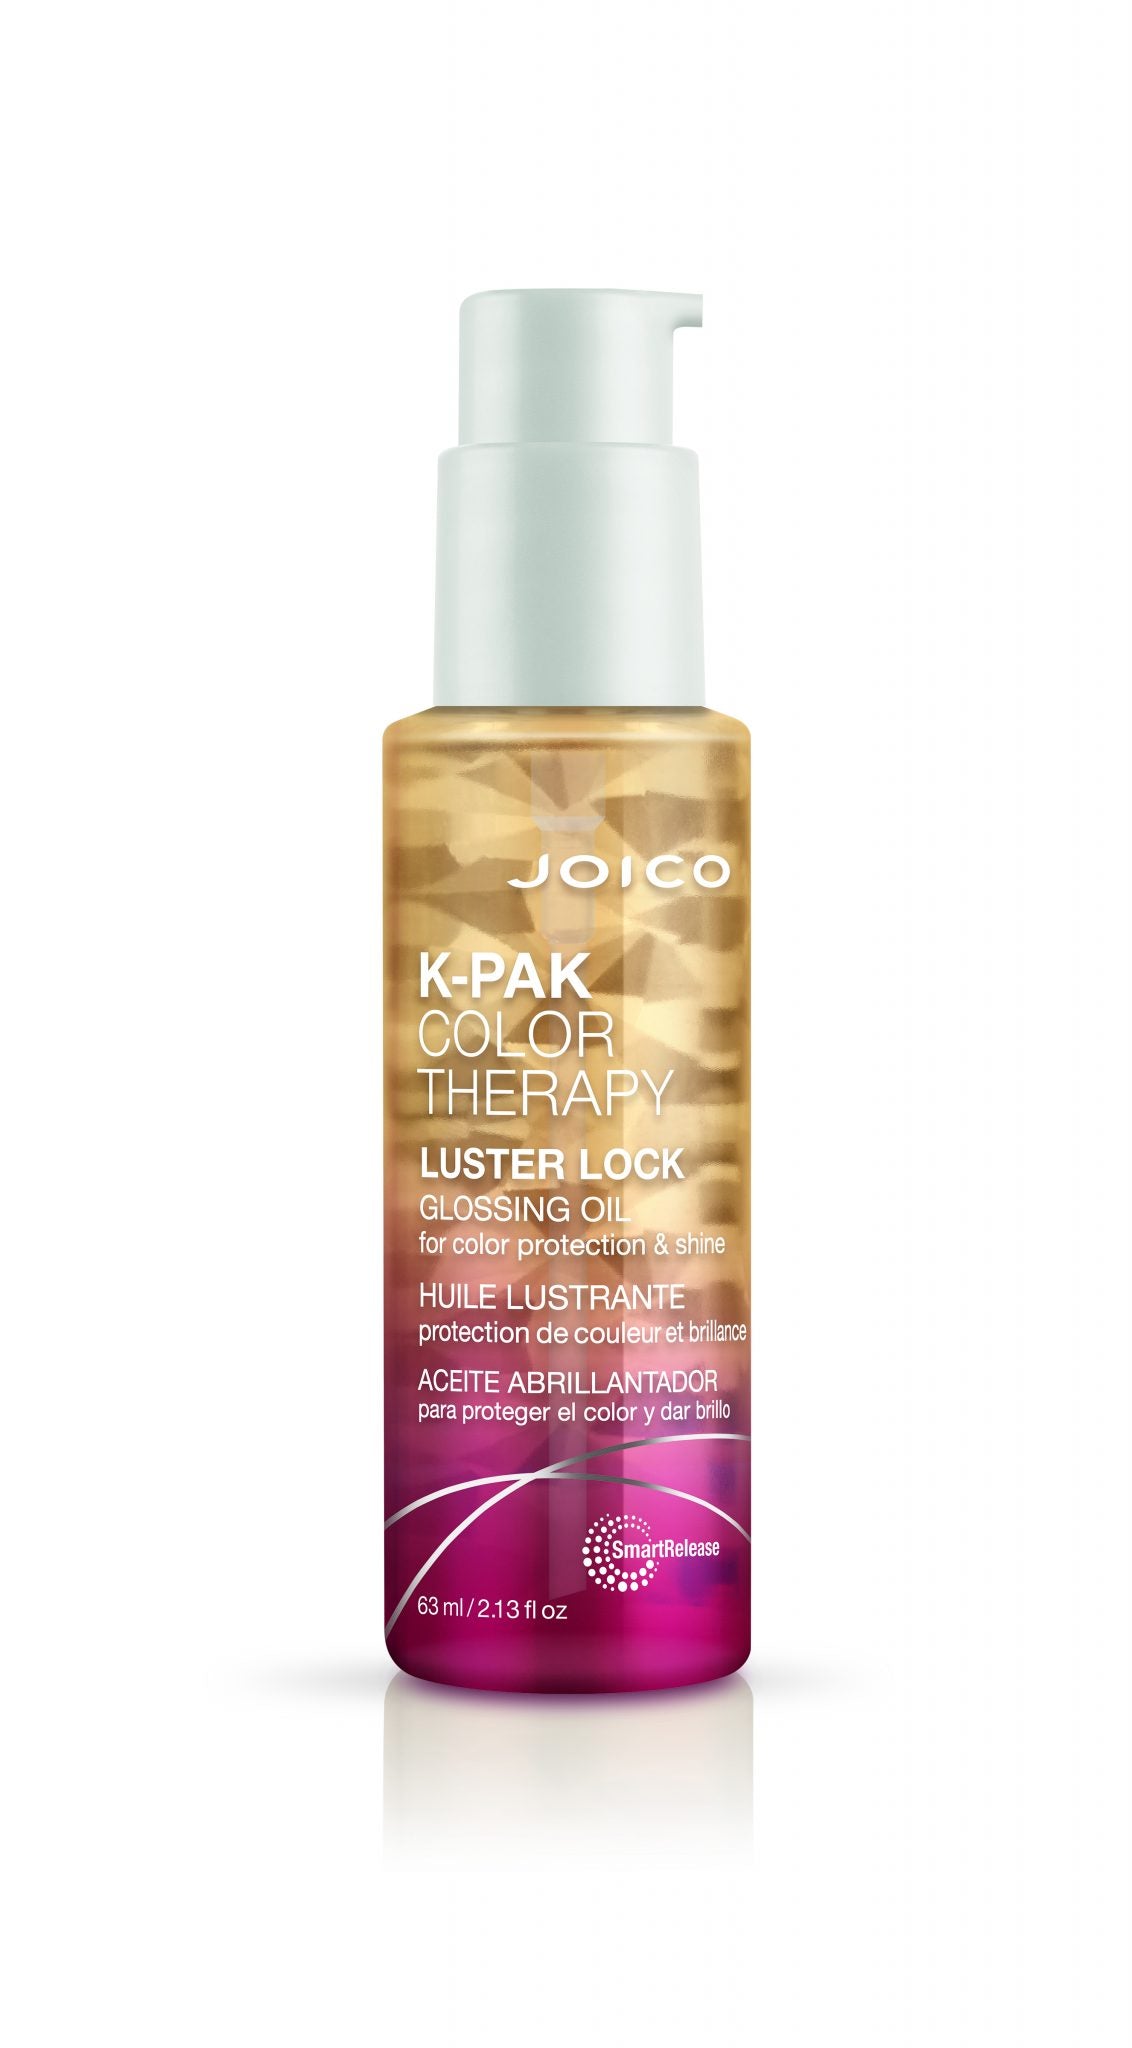 Joico K-Pak Colour Therapy Luster Lock Glossing Oil